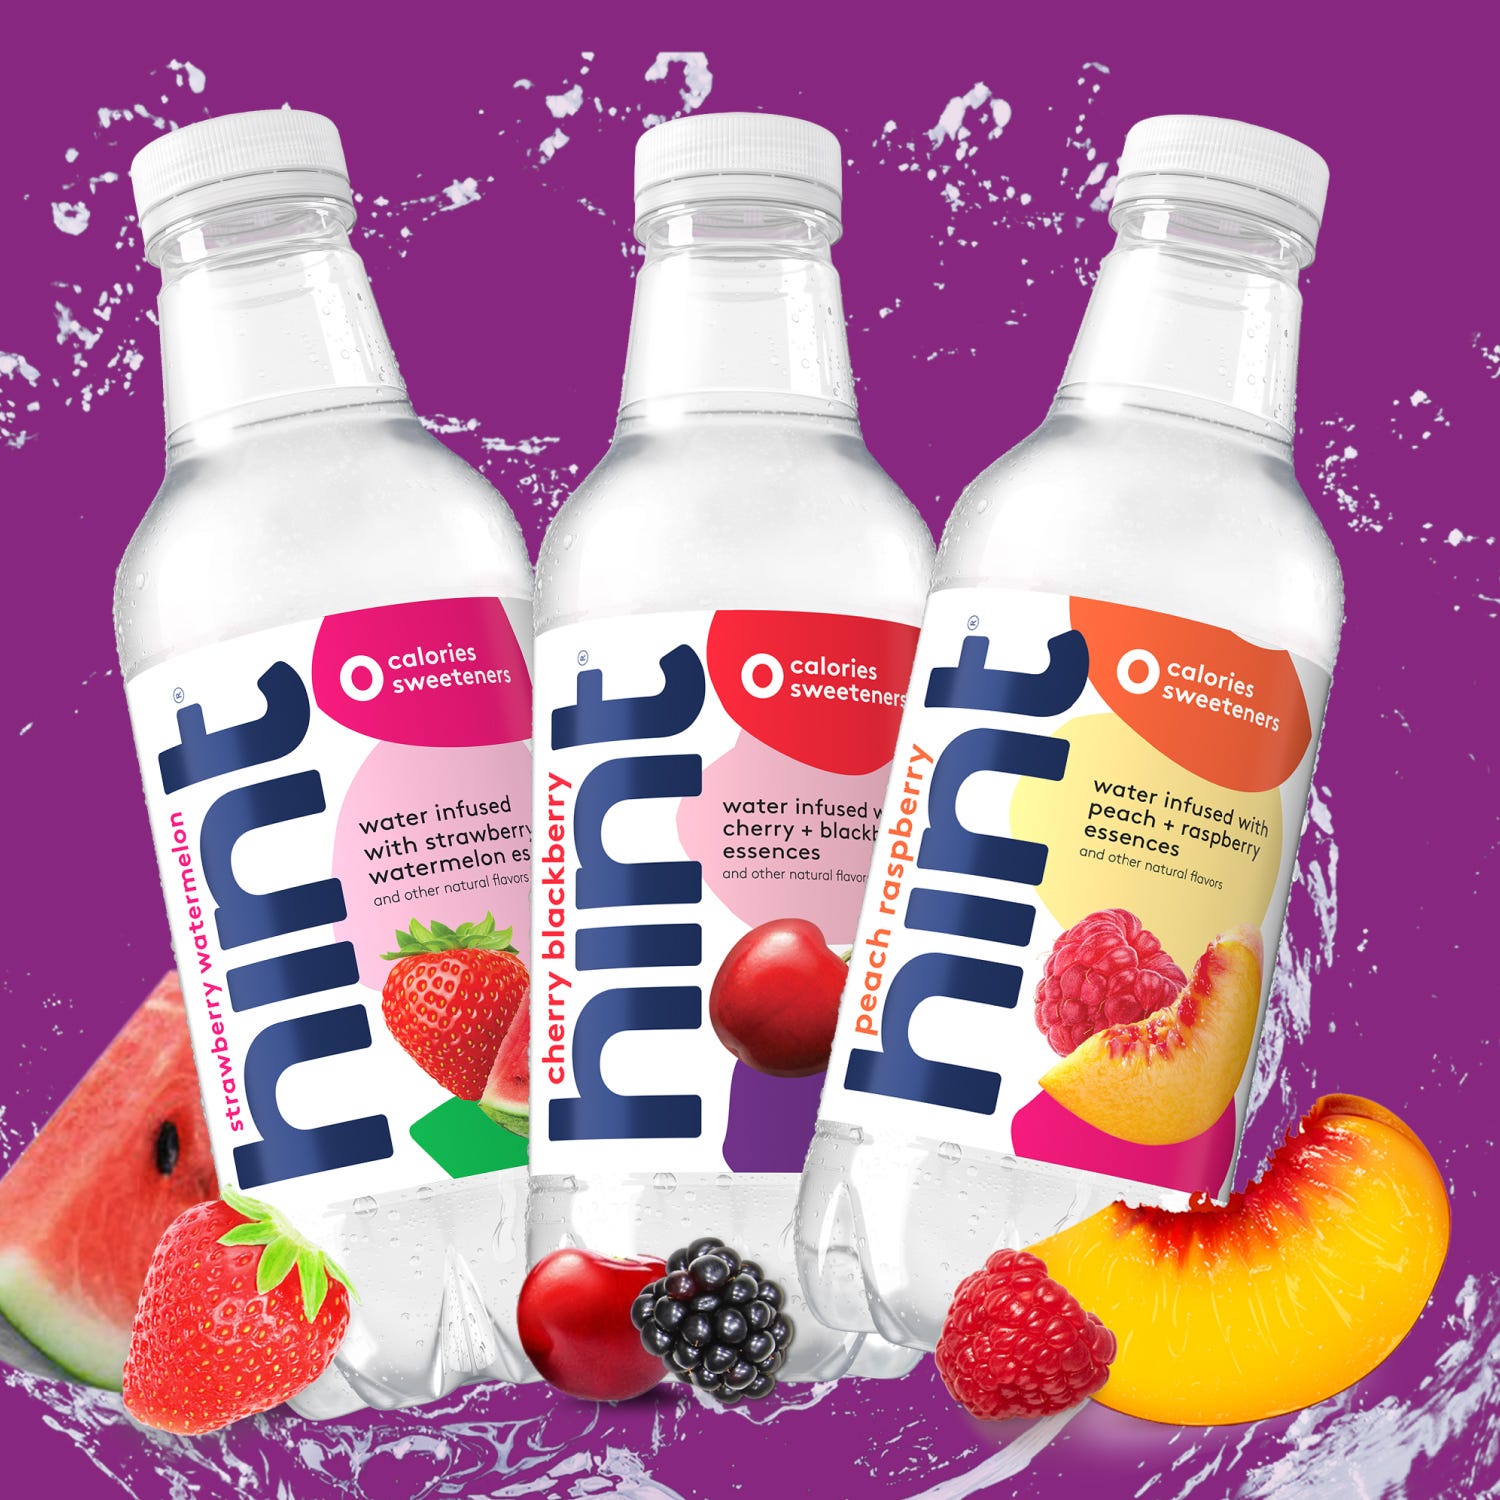 Three bottles of Hint flavored water with watermelon, cherry, and peach varieties, splashed by colorful liquid.